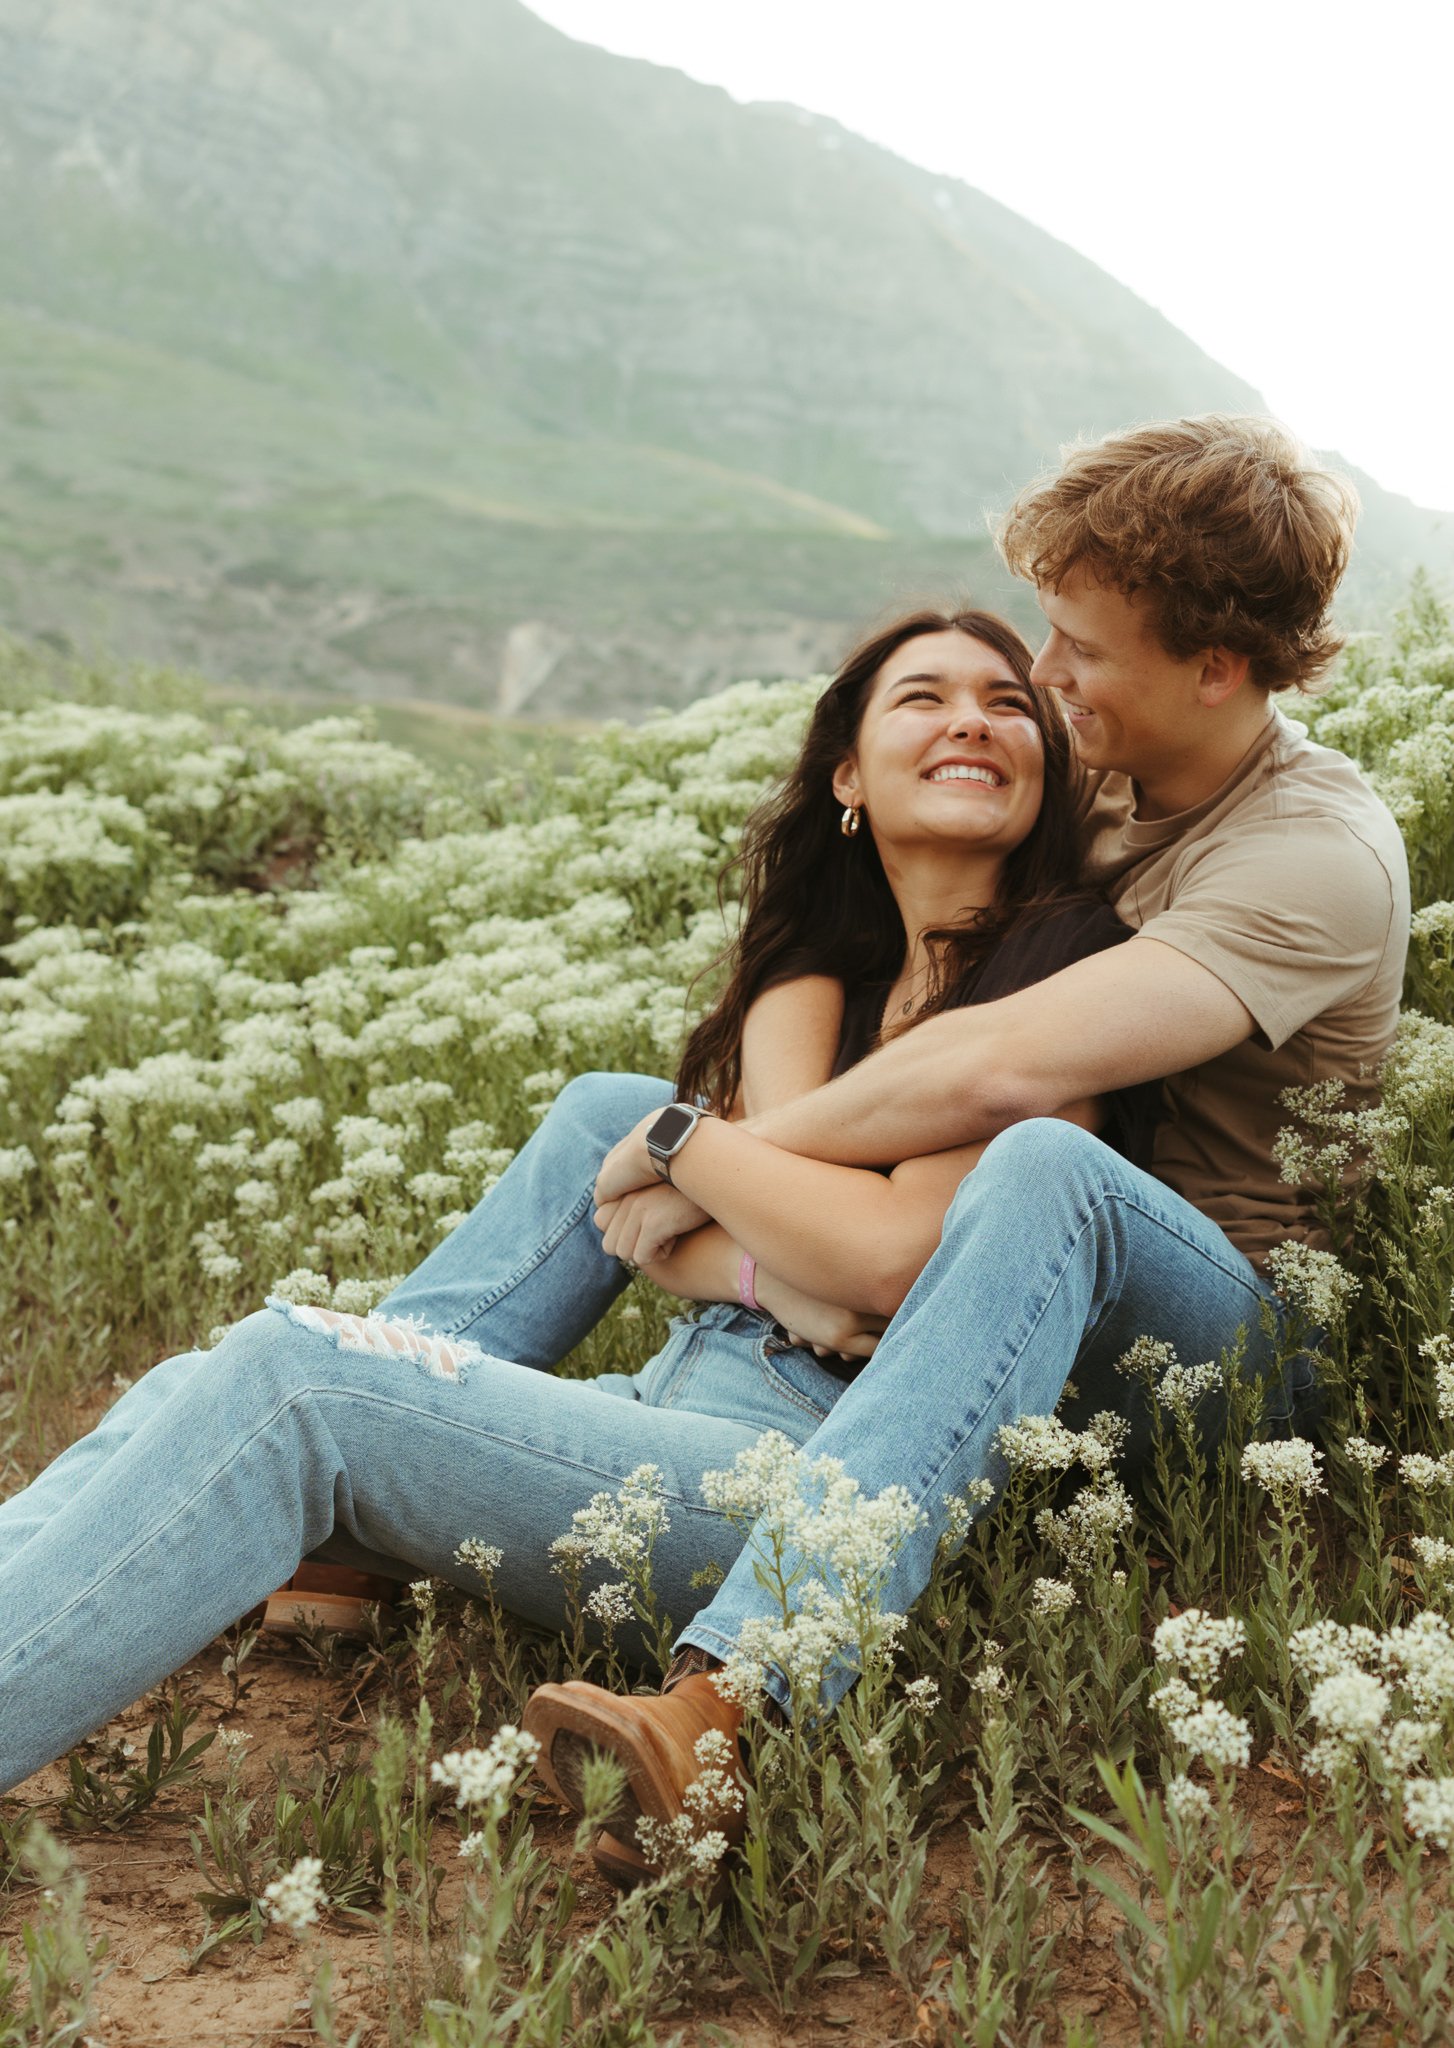 Spring-Provo-Canyon-Wildflowers-Engagement-Session-12